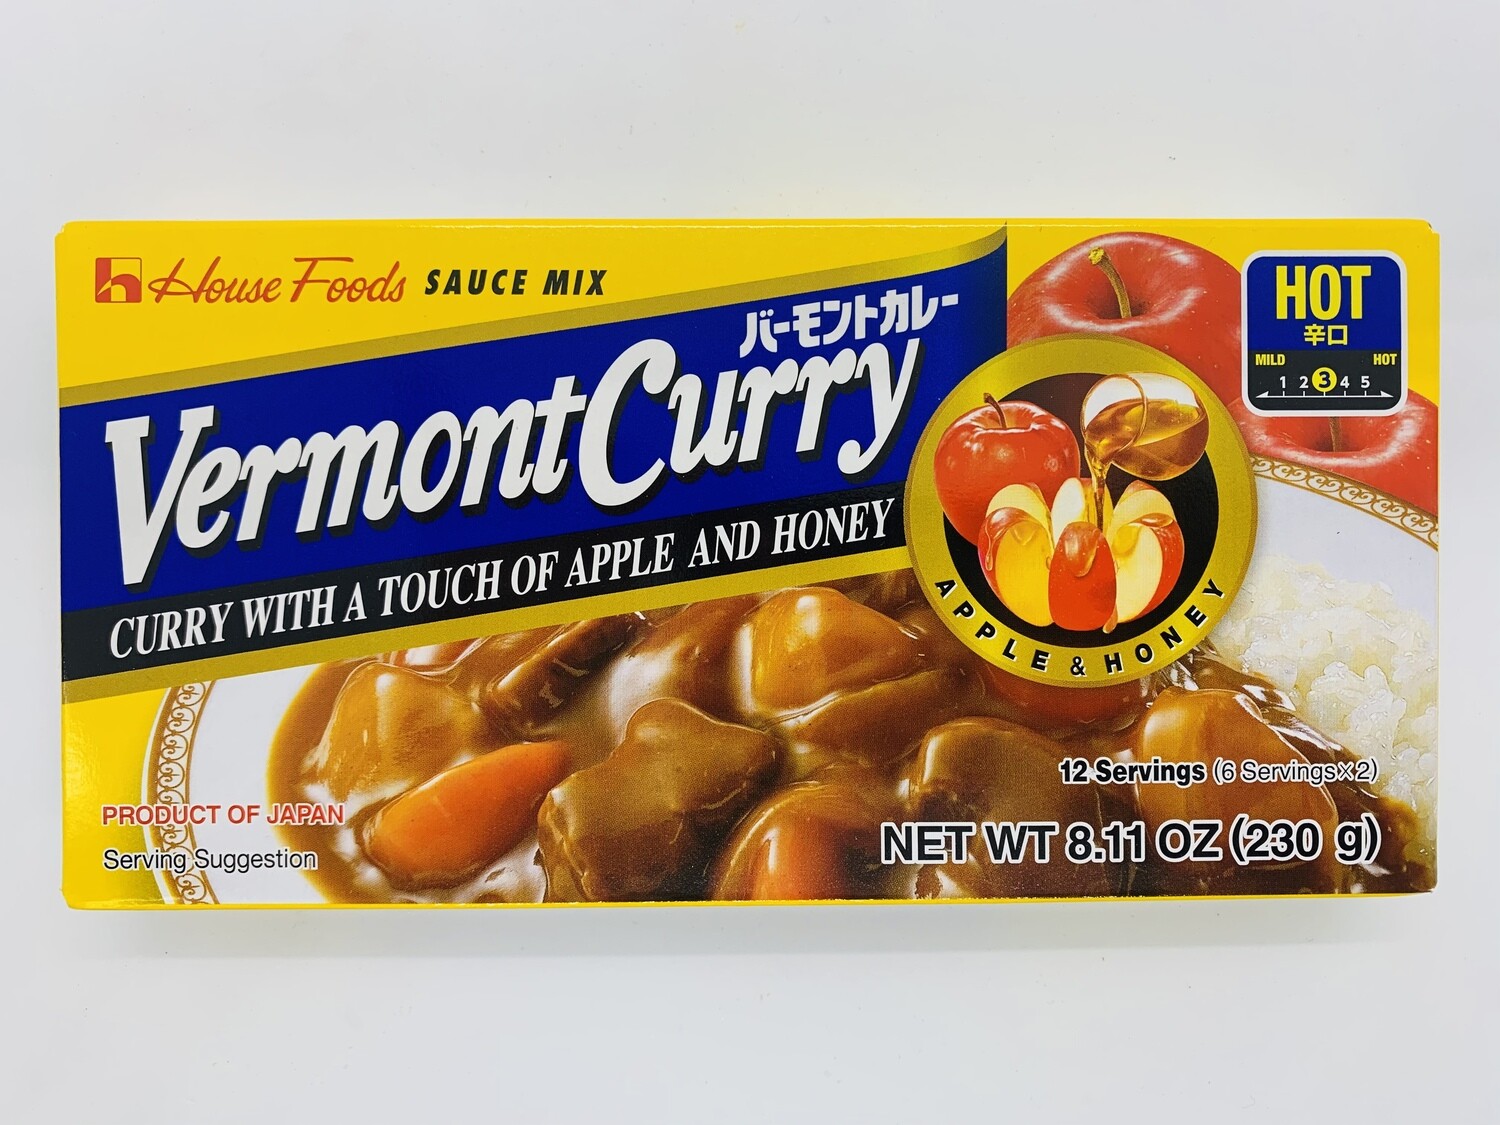 House Vermont Curry Hot 230g